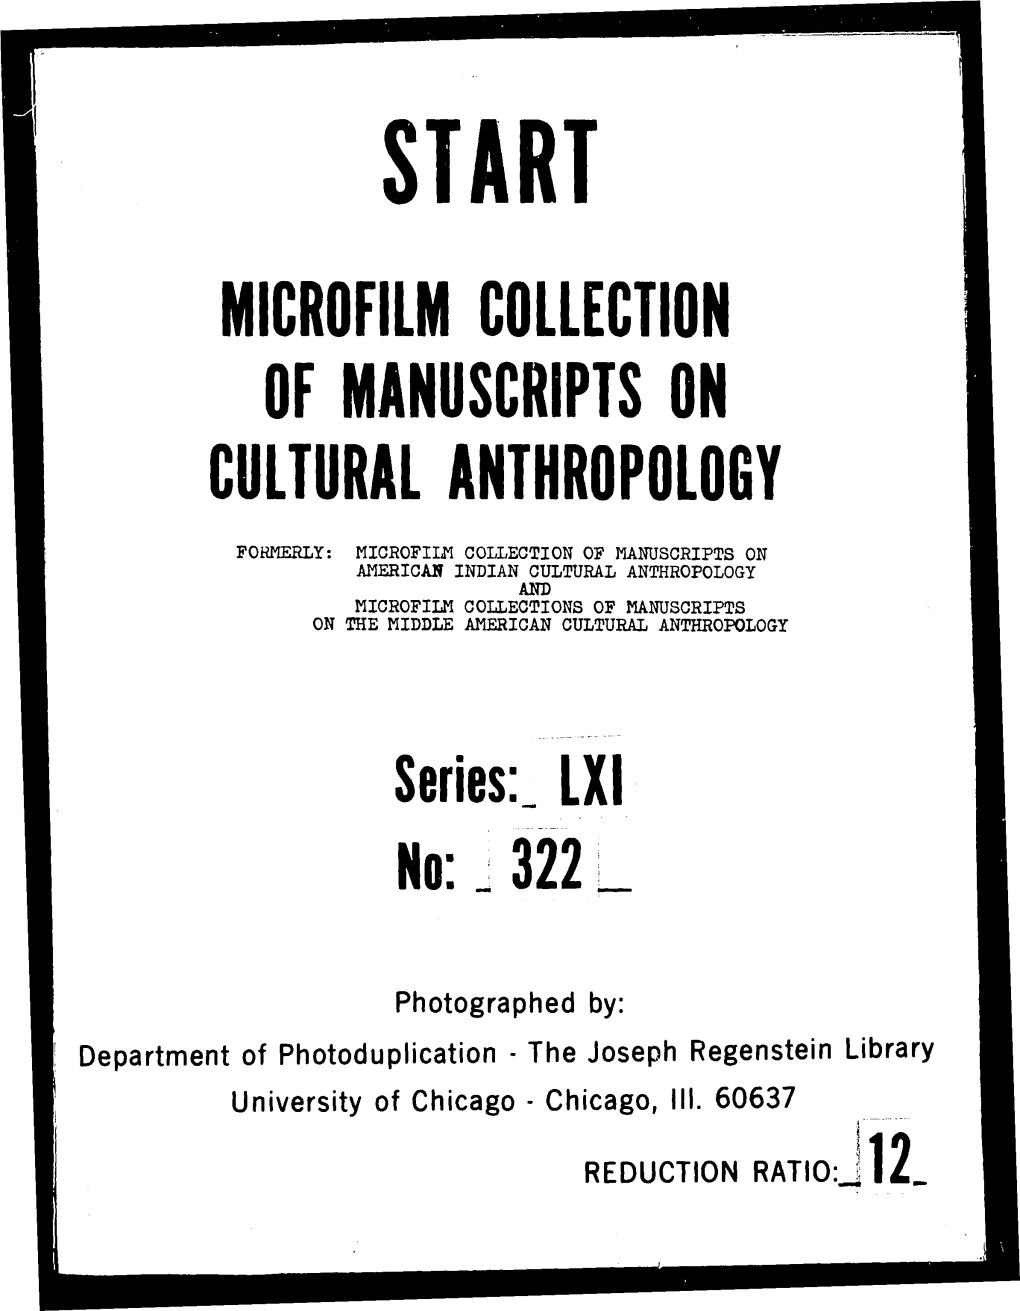 Microfilm Collection of Manuscripts on Cultural Anthropology